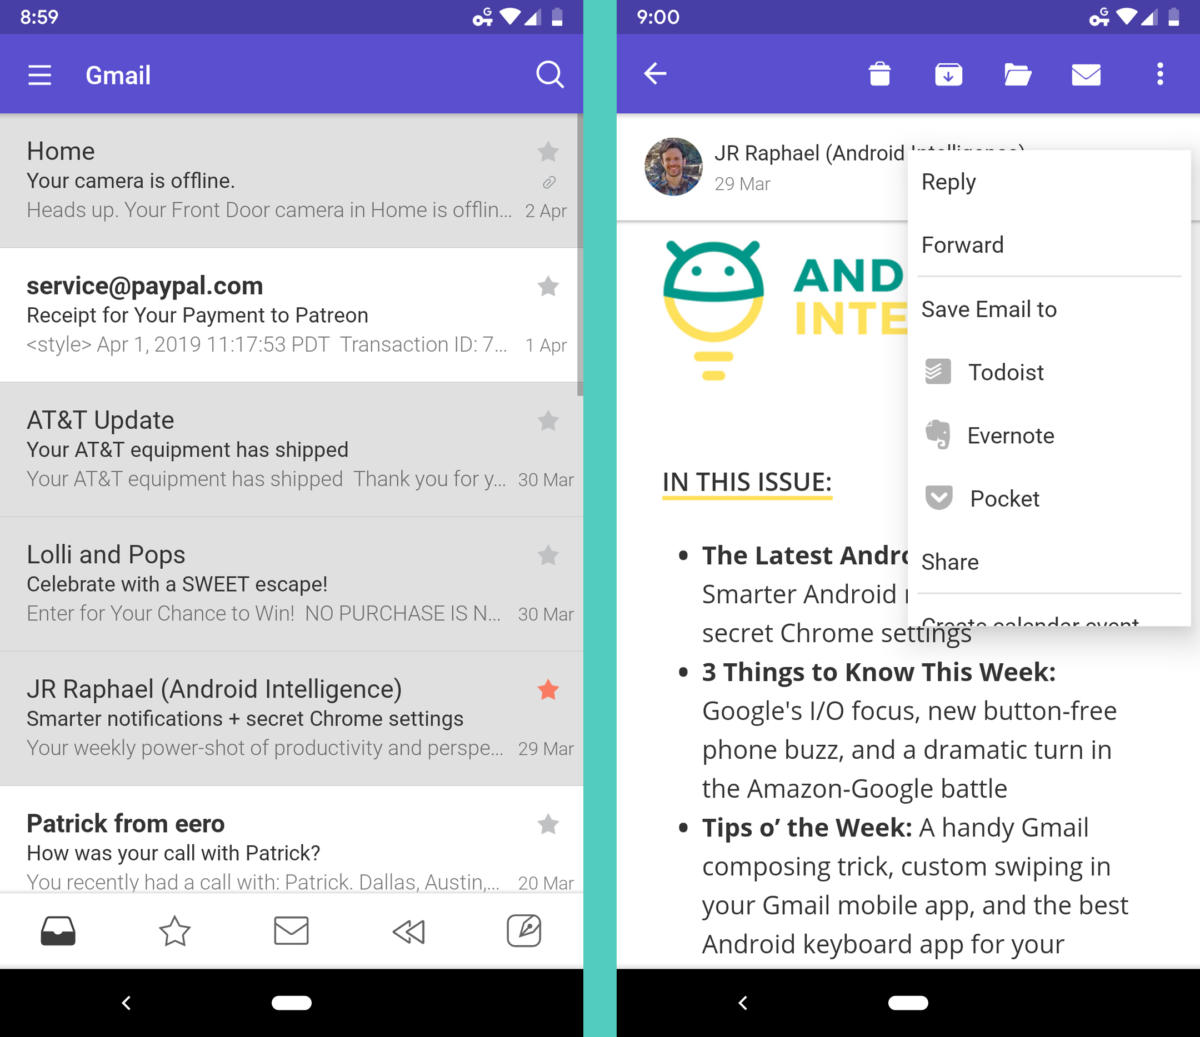 Gmail Alternative Android Email Apps - Newton